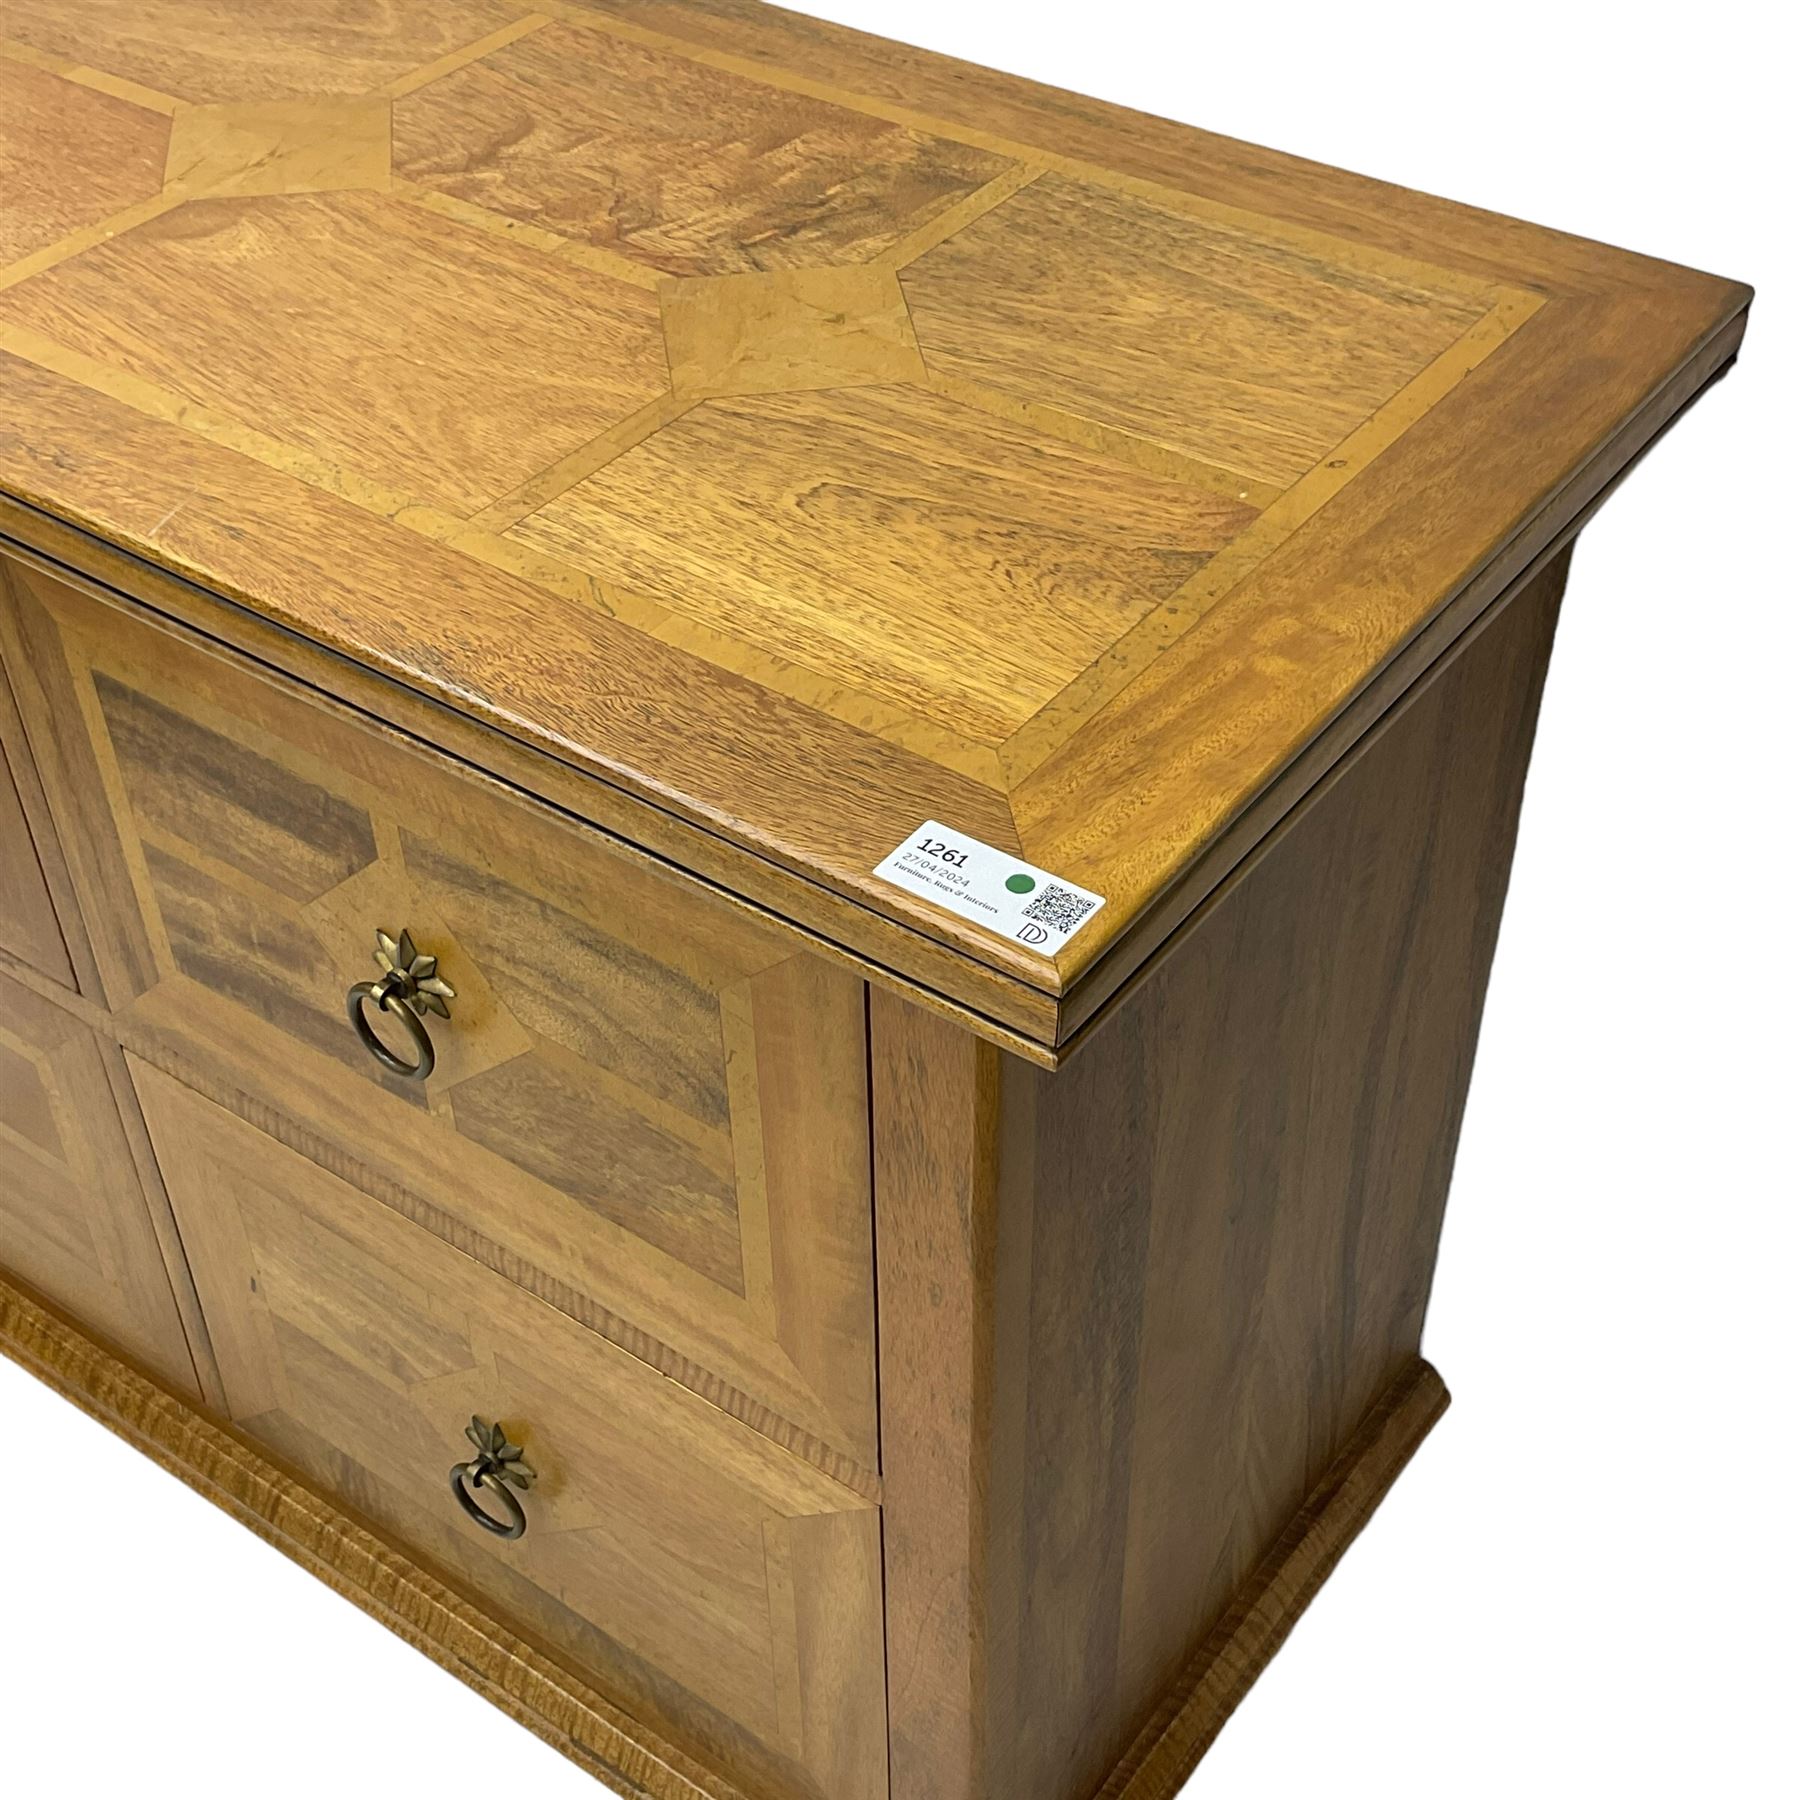 Barker & Stonehouse - flagstone chest fitted with four drawers - Image 3 of 5